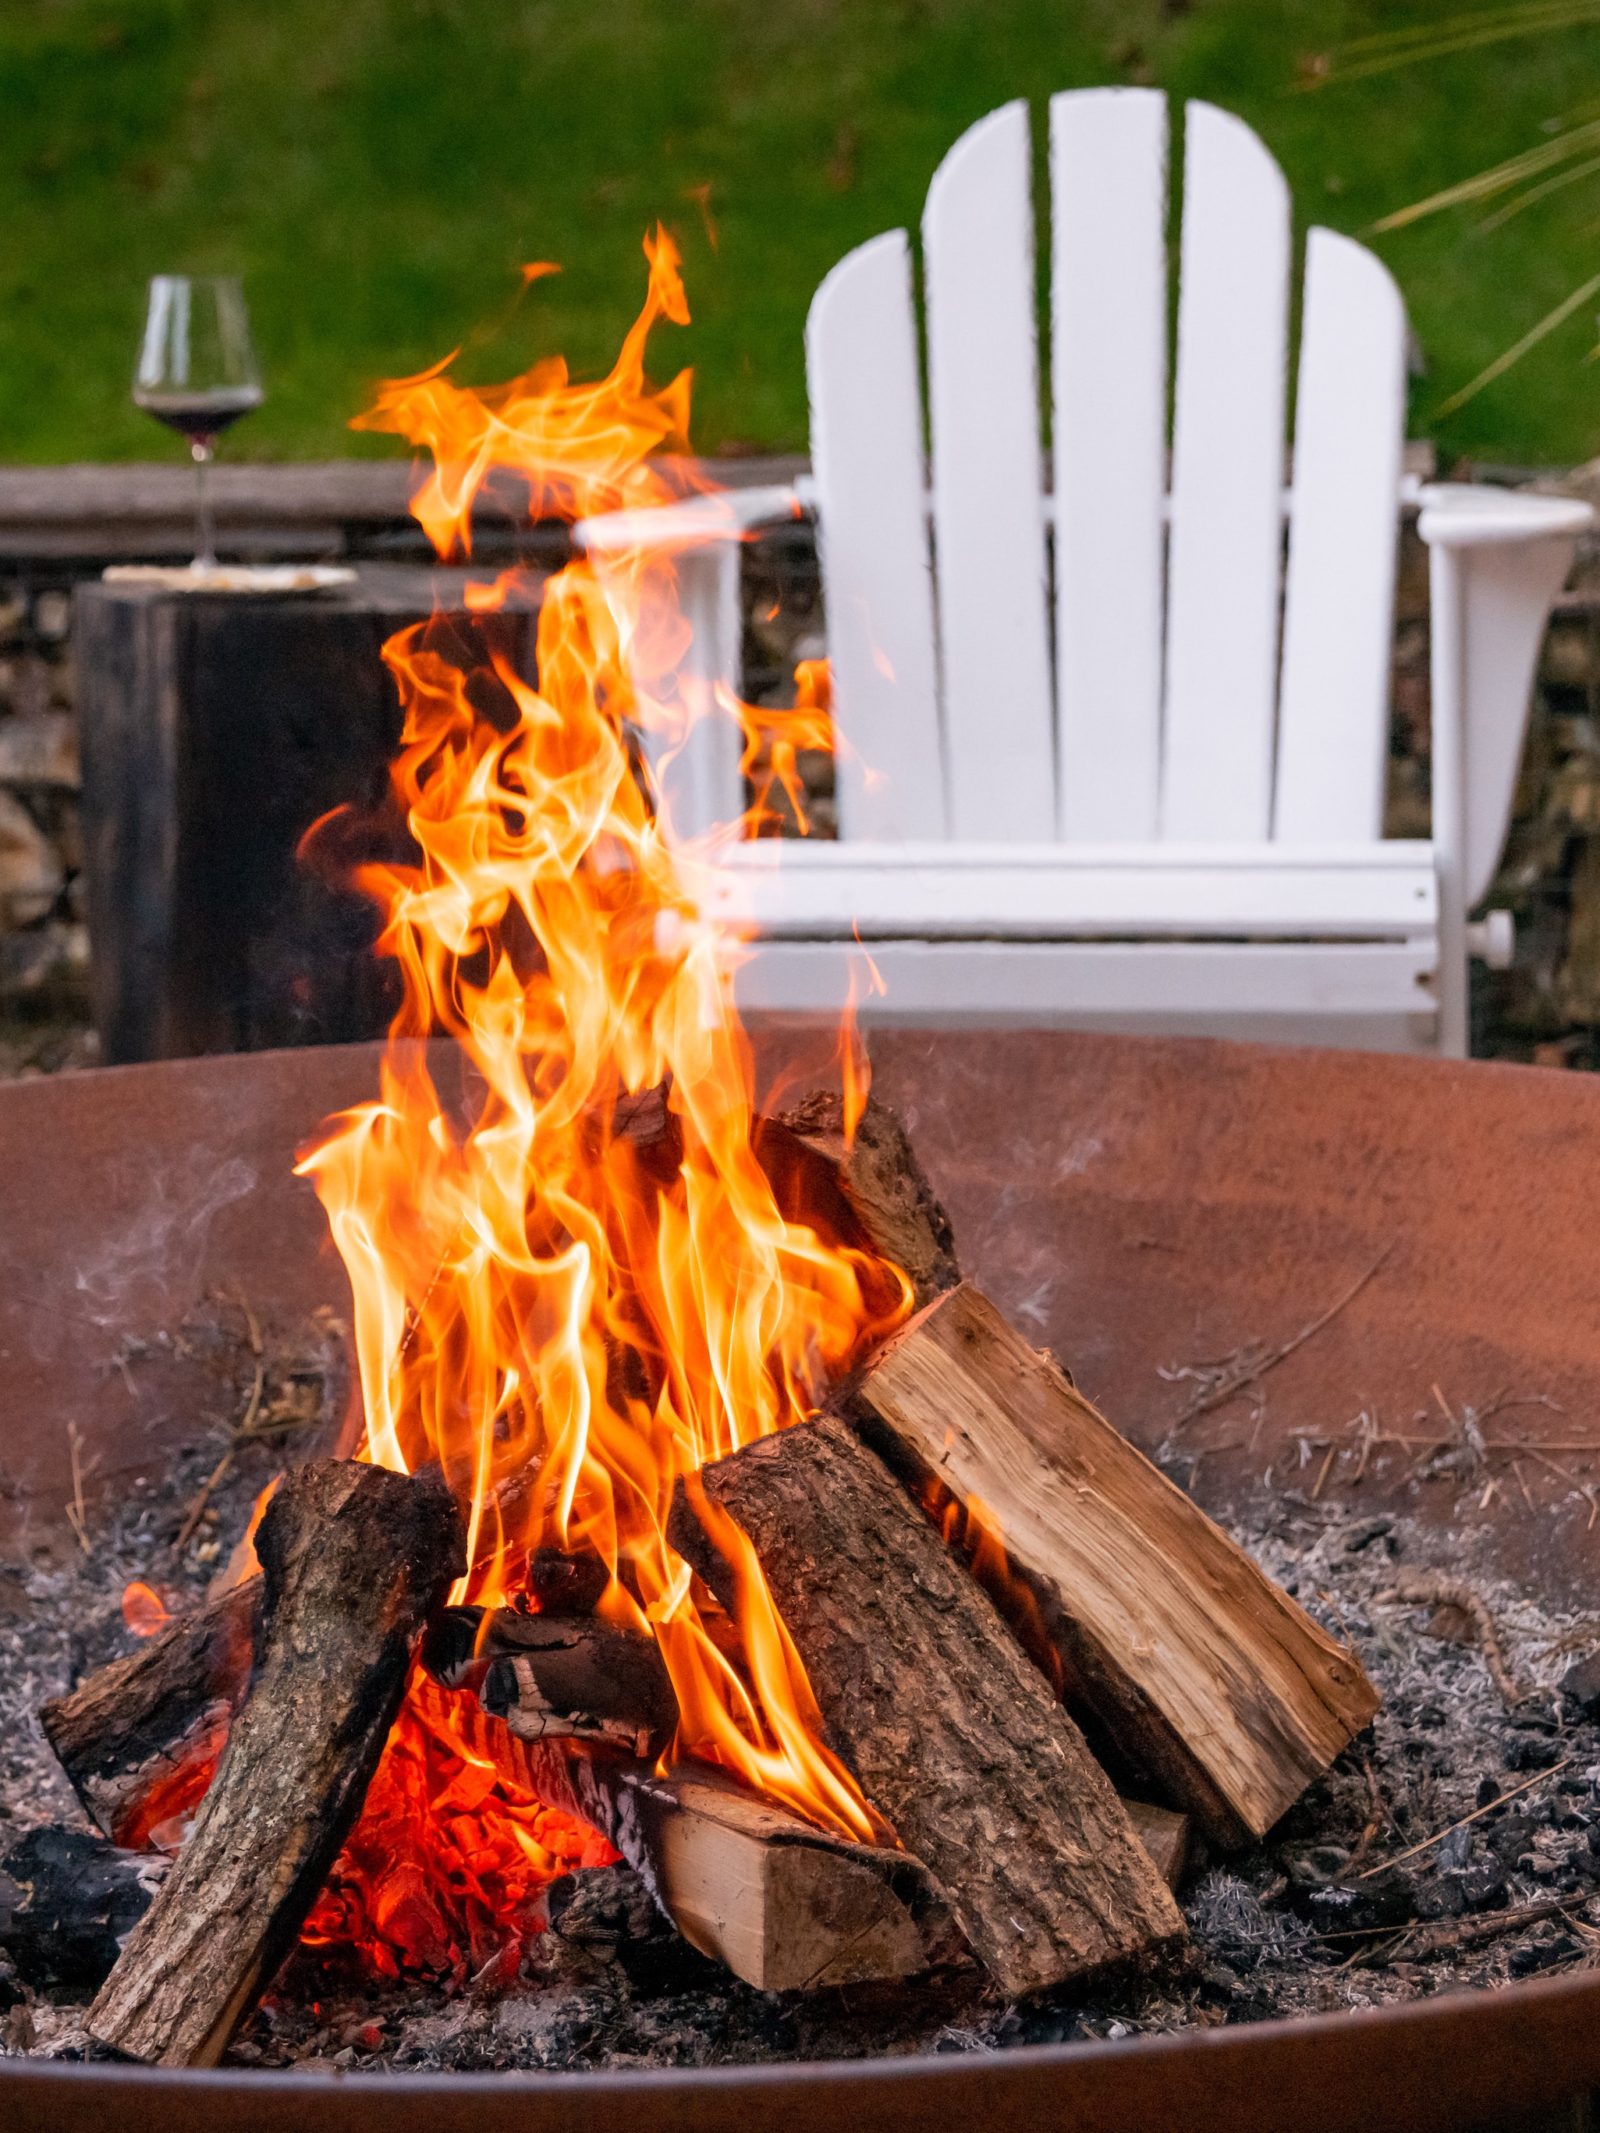 How To Safely Use A Fire Pit On Your, Fire Pit On Composite Deck